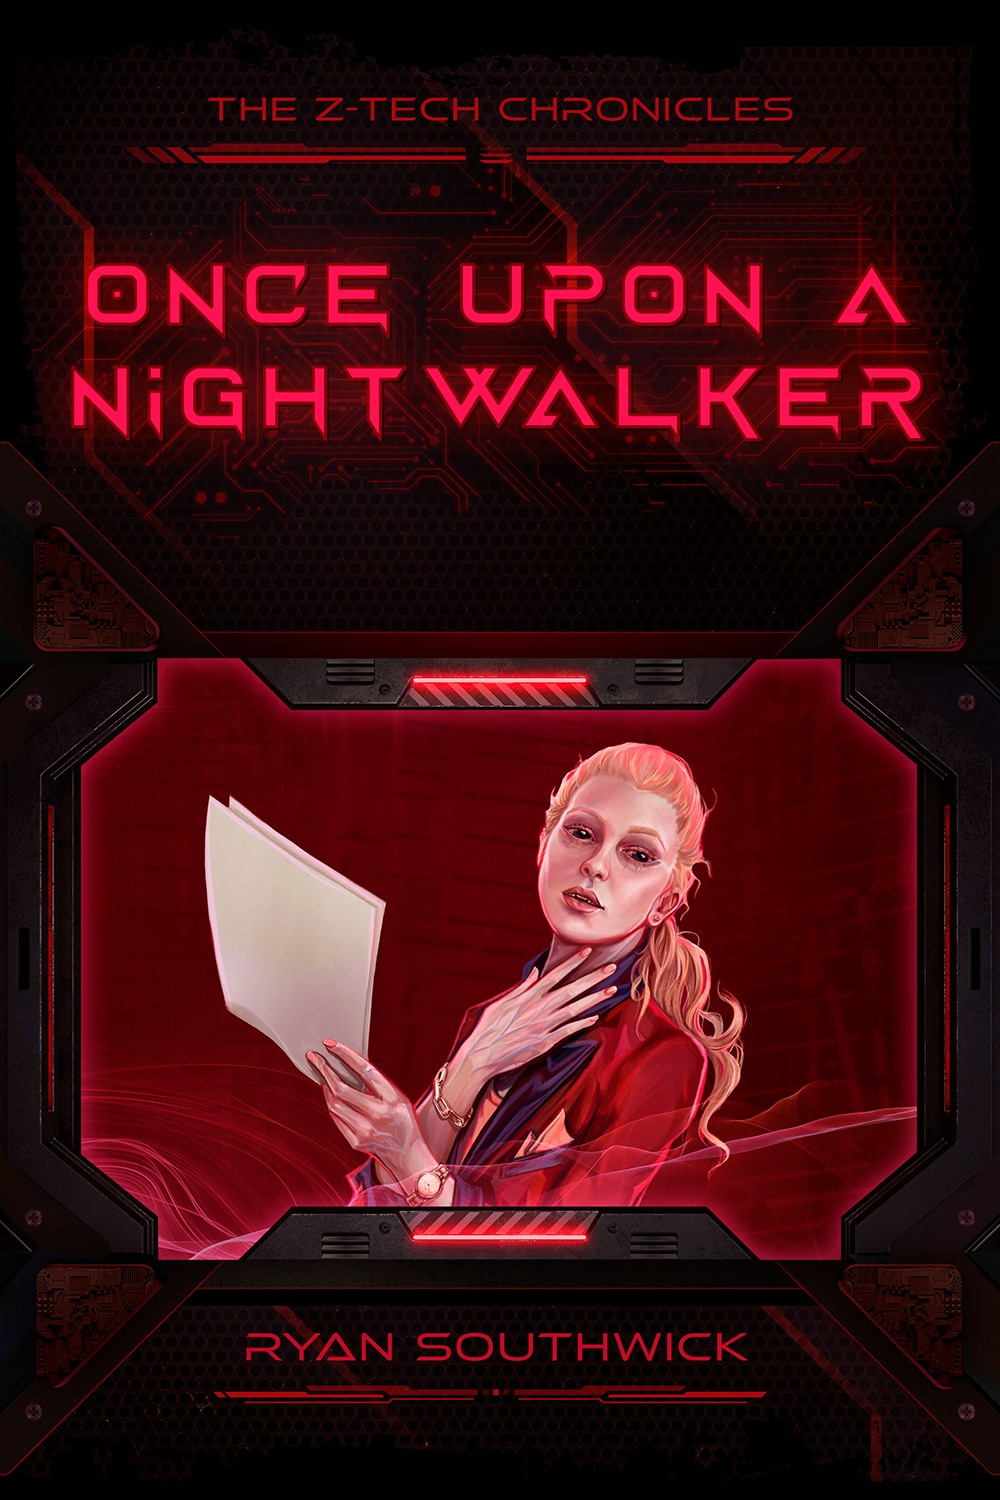 Once Upon a Nightwalker (product)